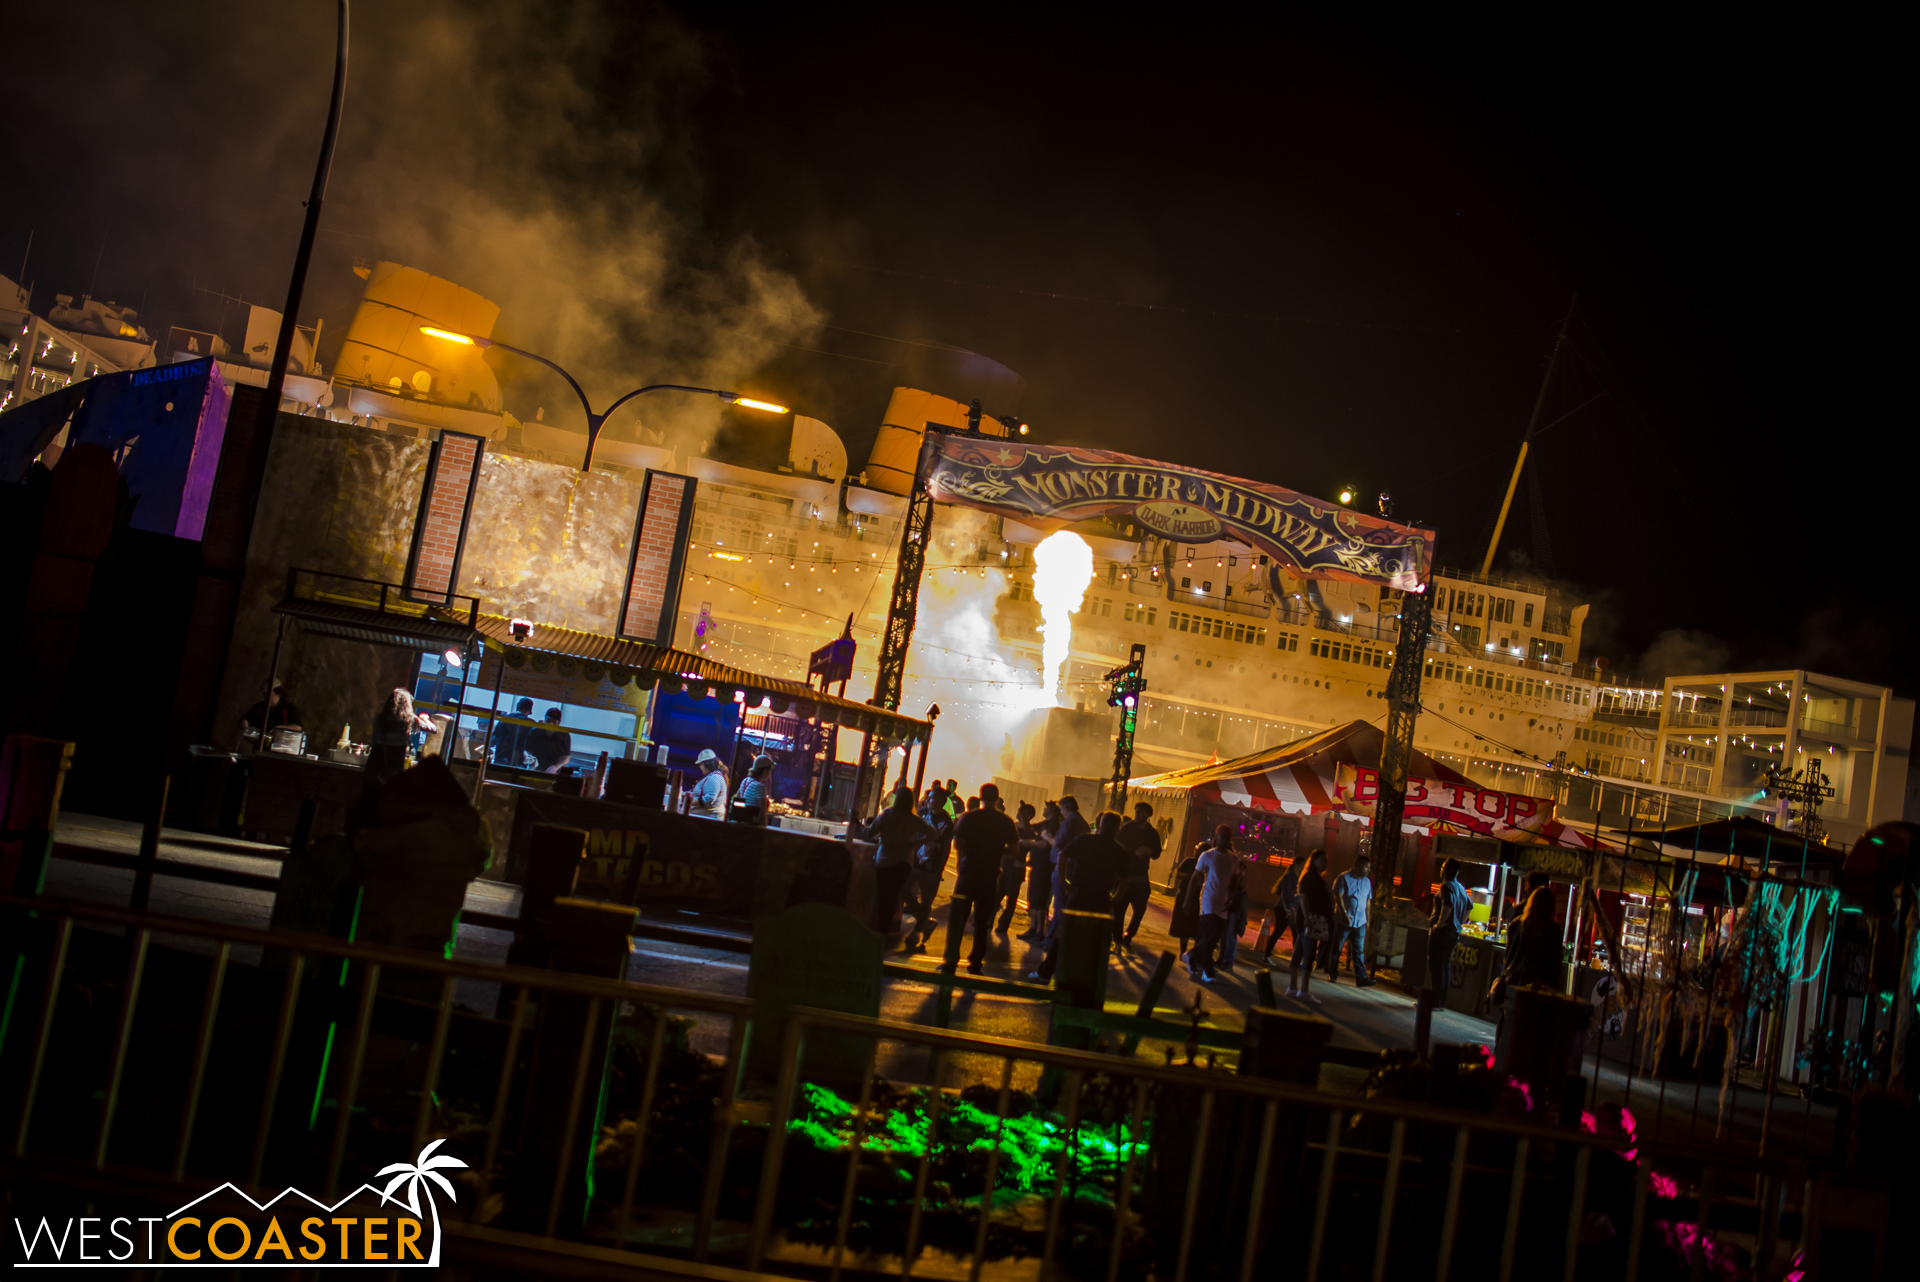  Fire along Monster Midway creates a dramatic sight! 